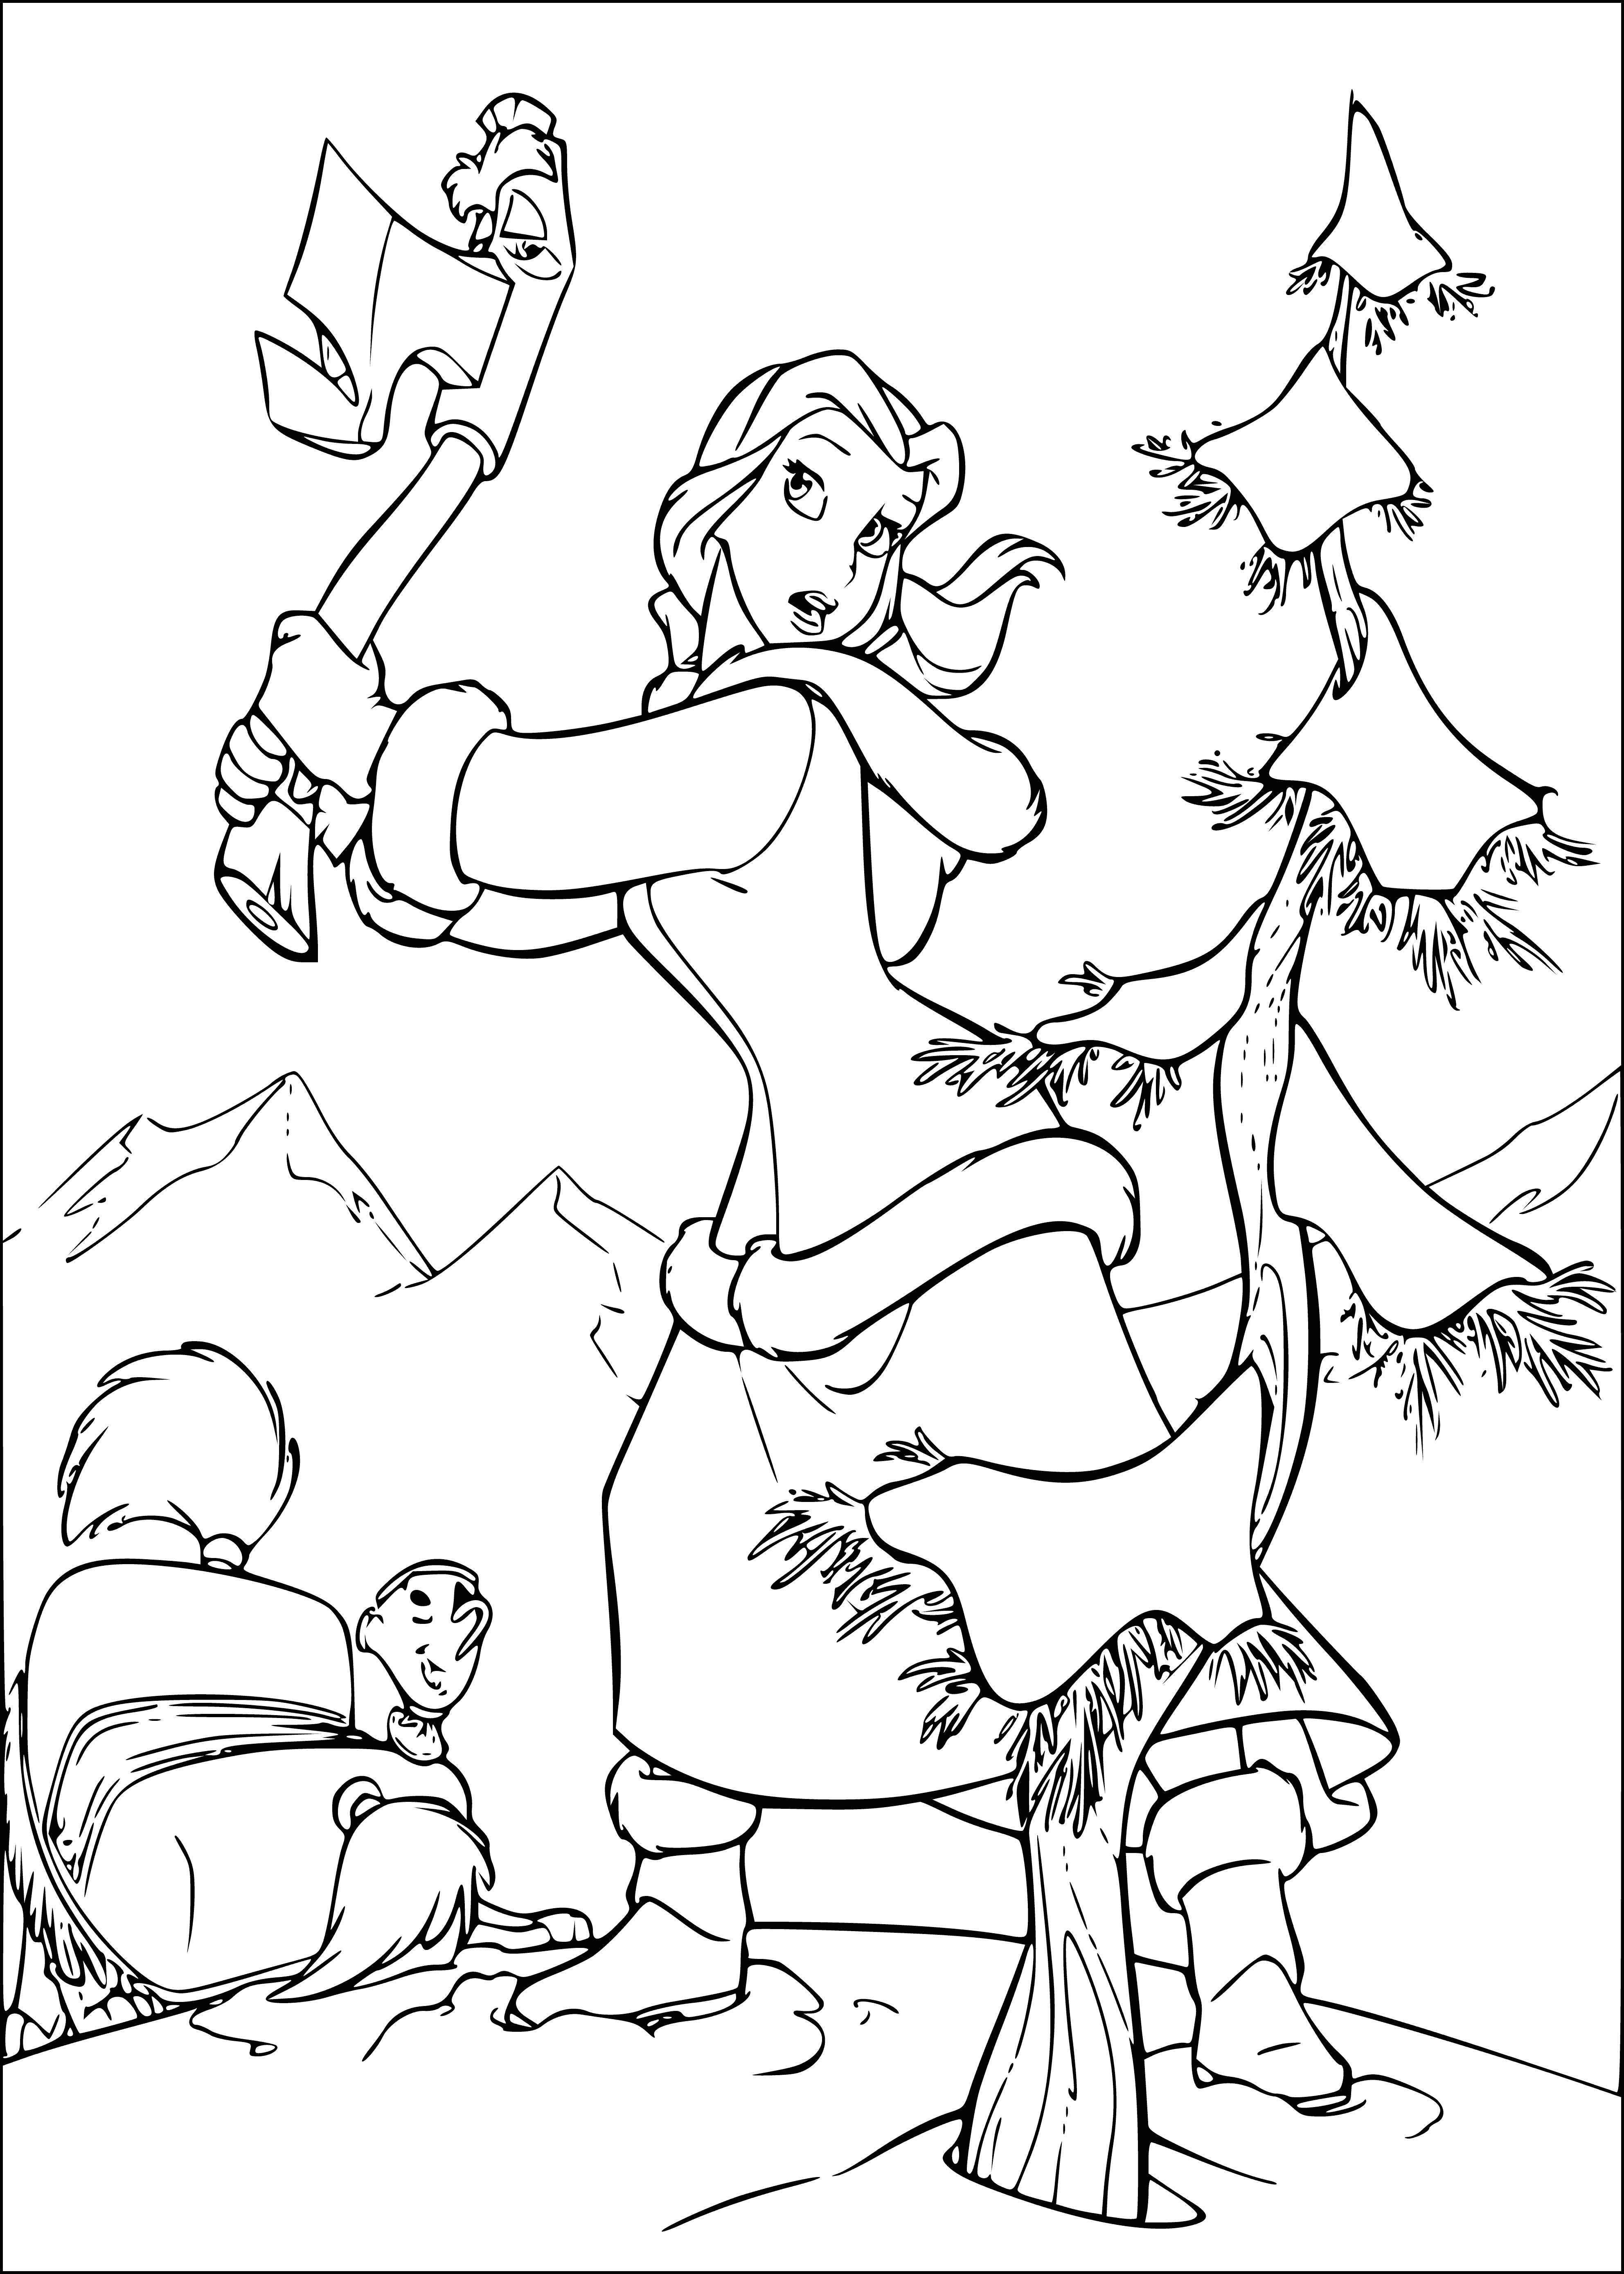 The Forest Raised a Christmas Tree coloring page